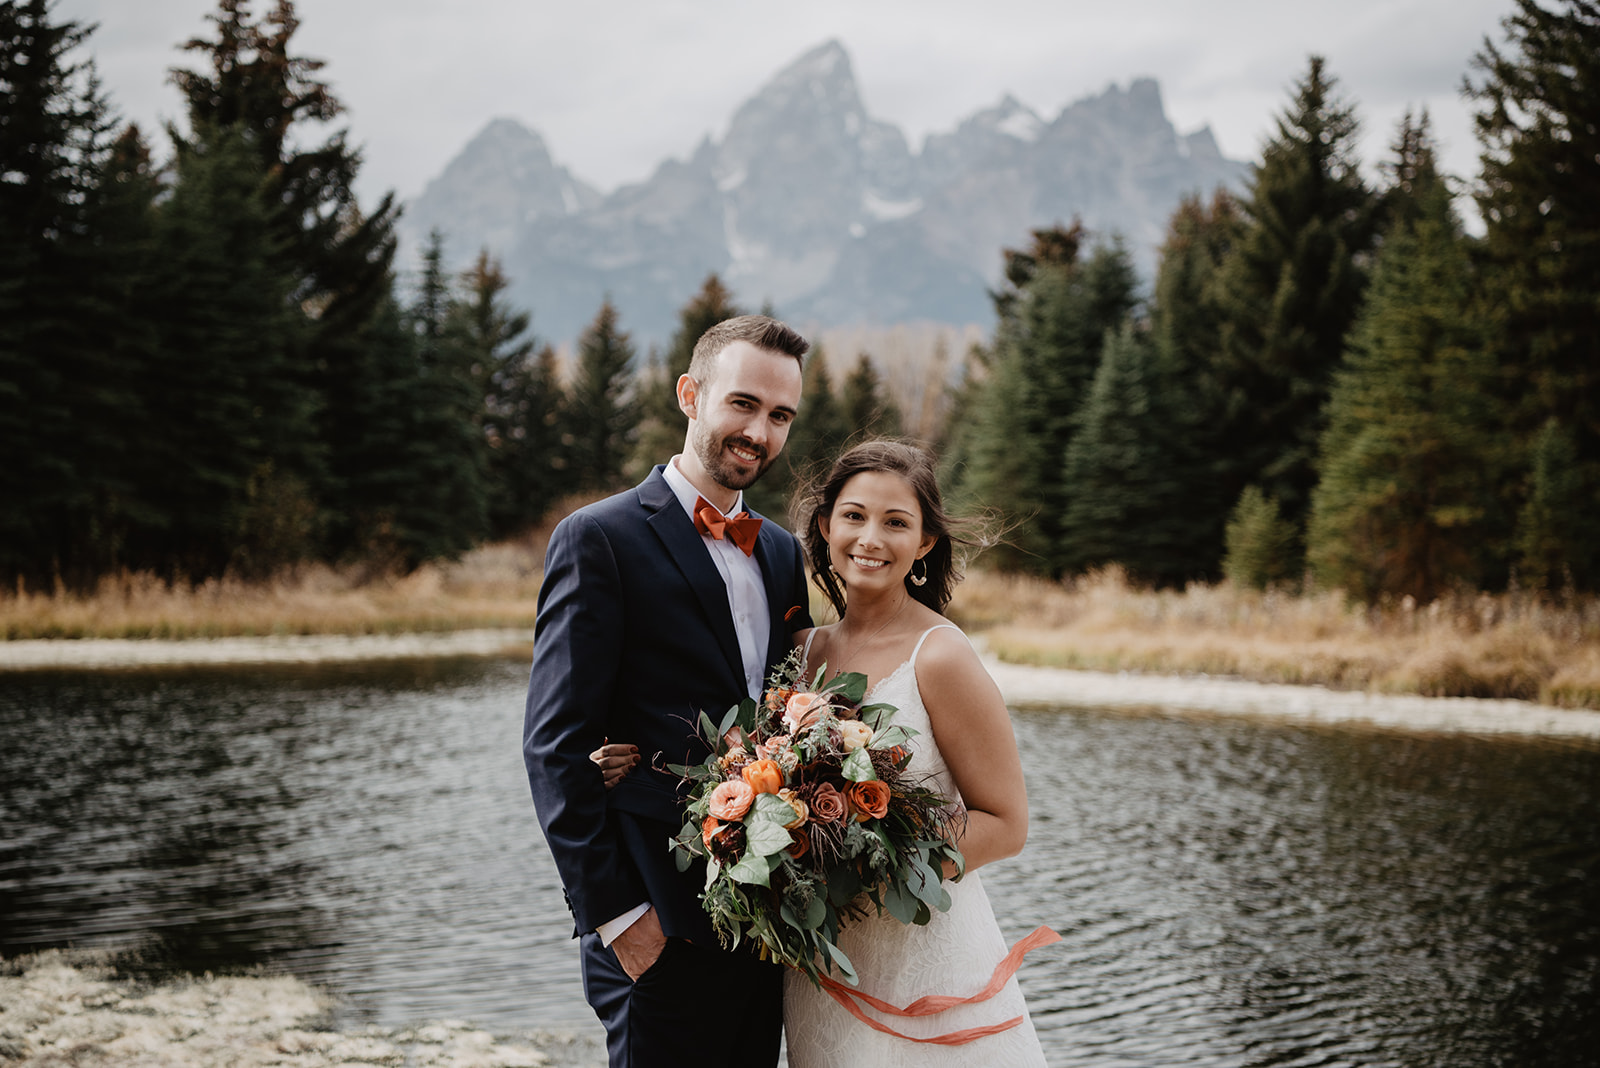 Jackson Hole bride and groom holding each other as they smile at the camera with the Grand Tetons in the distance